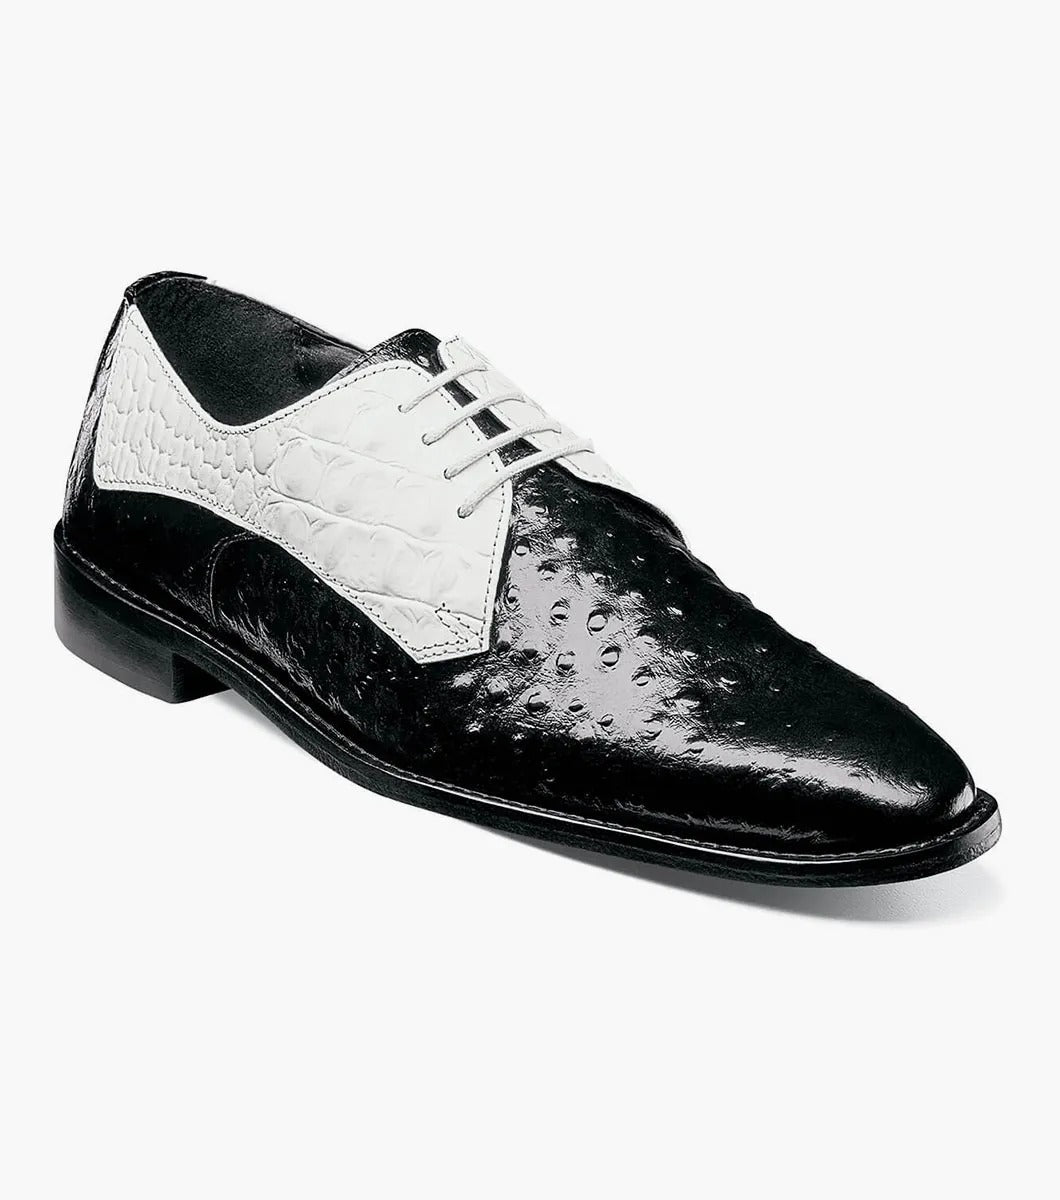 Stacy Adams - RUSSO Leather Sole Plain Toe Oxford - Black w/ White - 25273-111